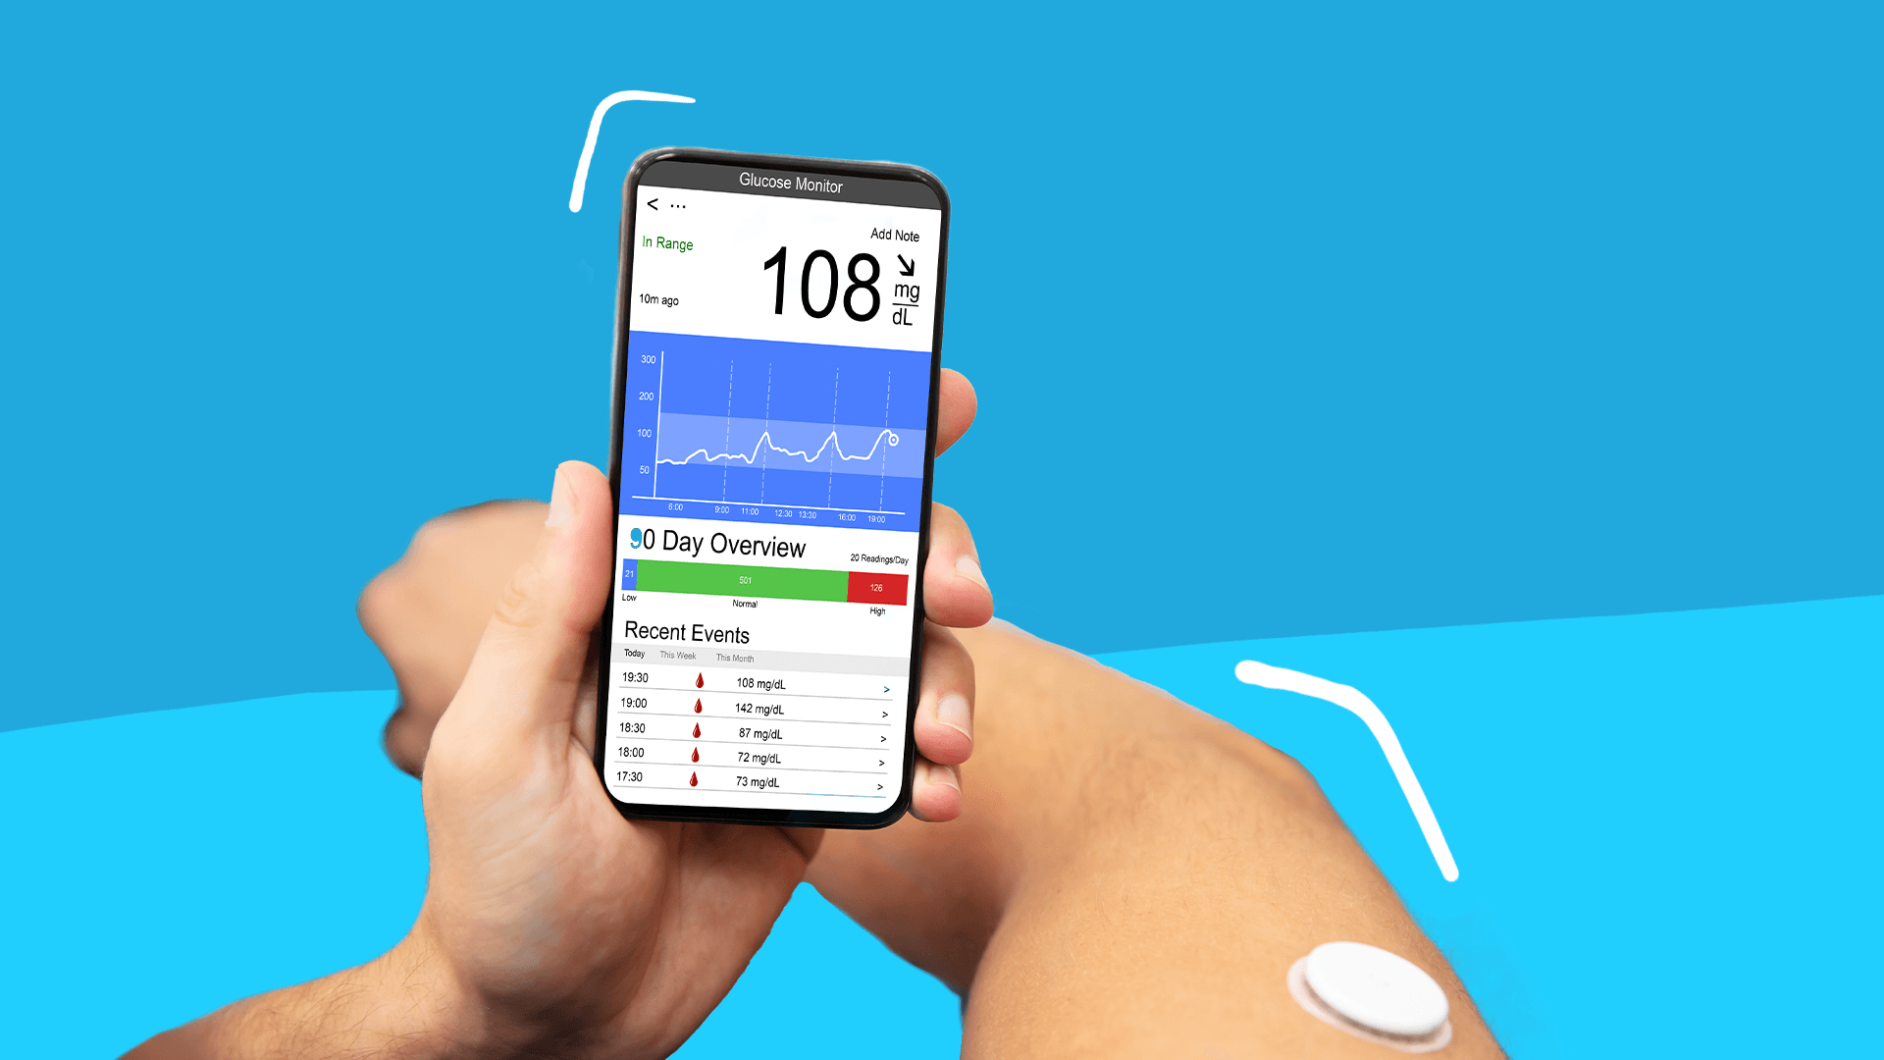 15 Best Calorie Counter Apps You Can Use in 2020